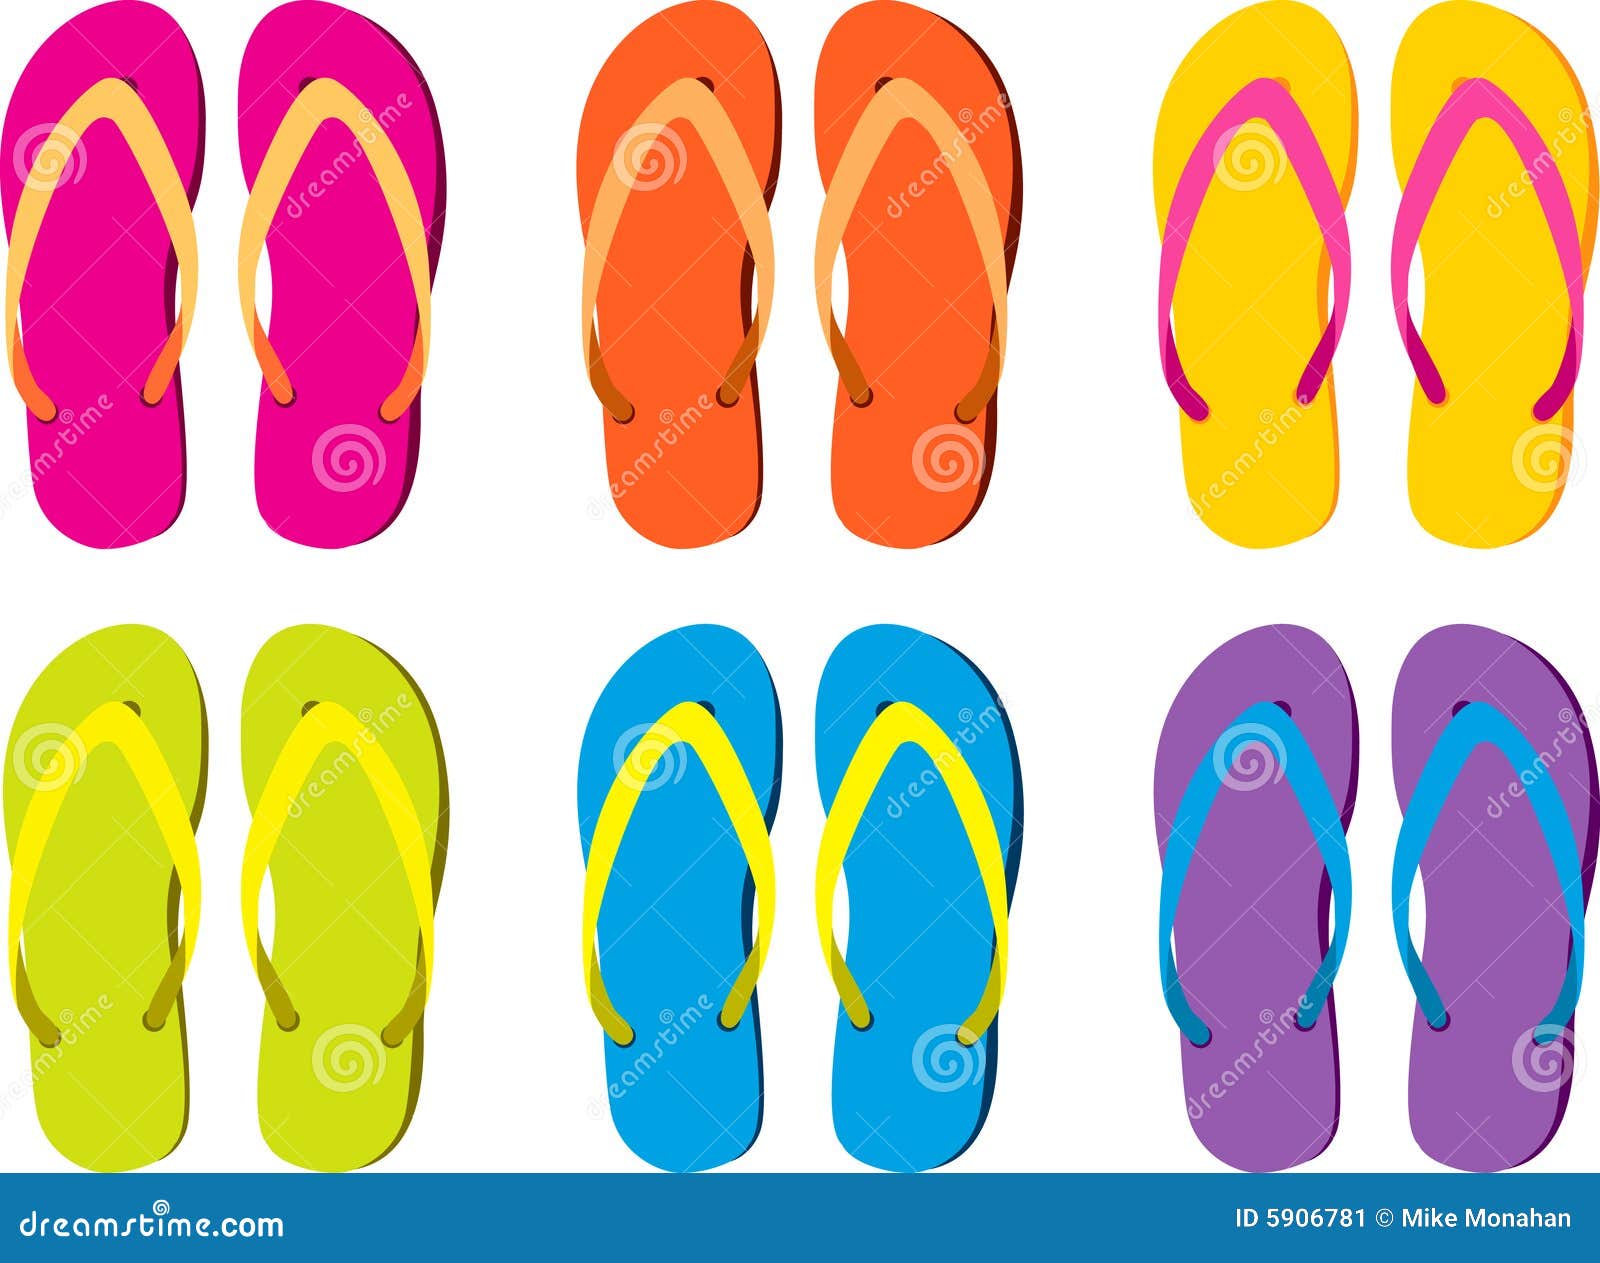 Colorful Flip Flops stock vector. Illustration of illustrated - 5906781